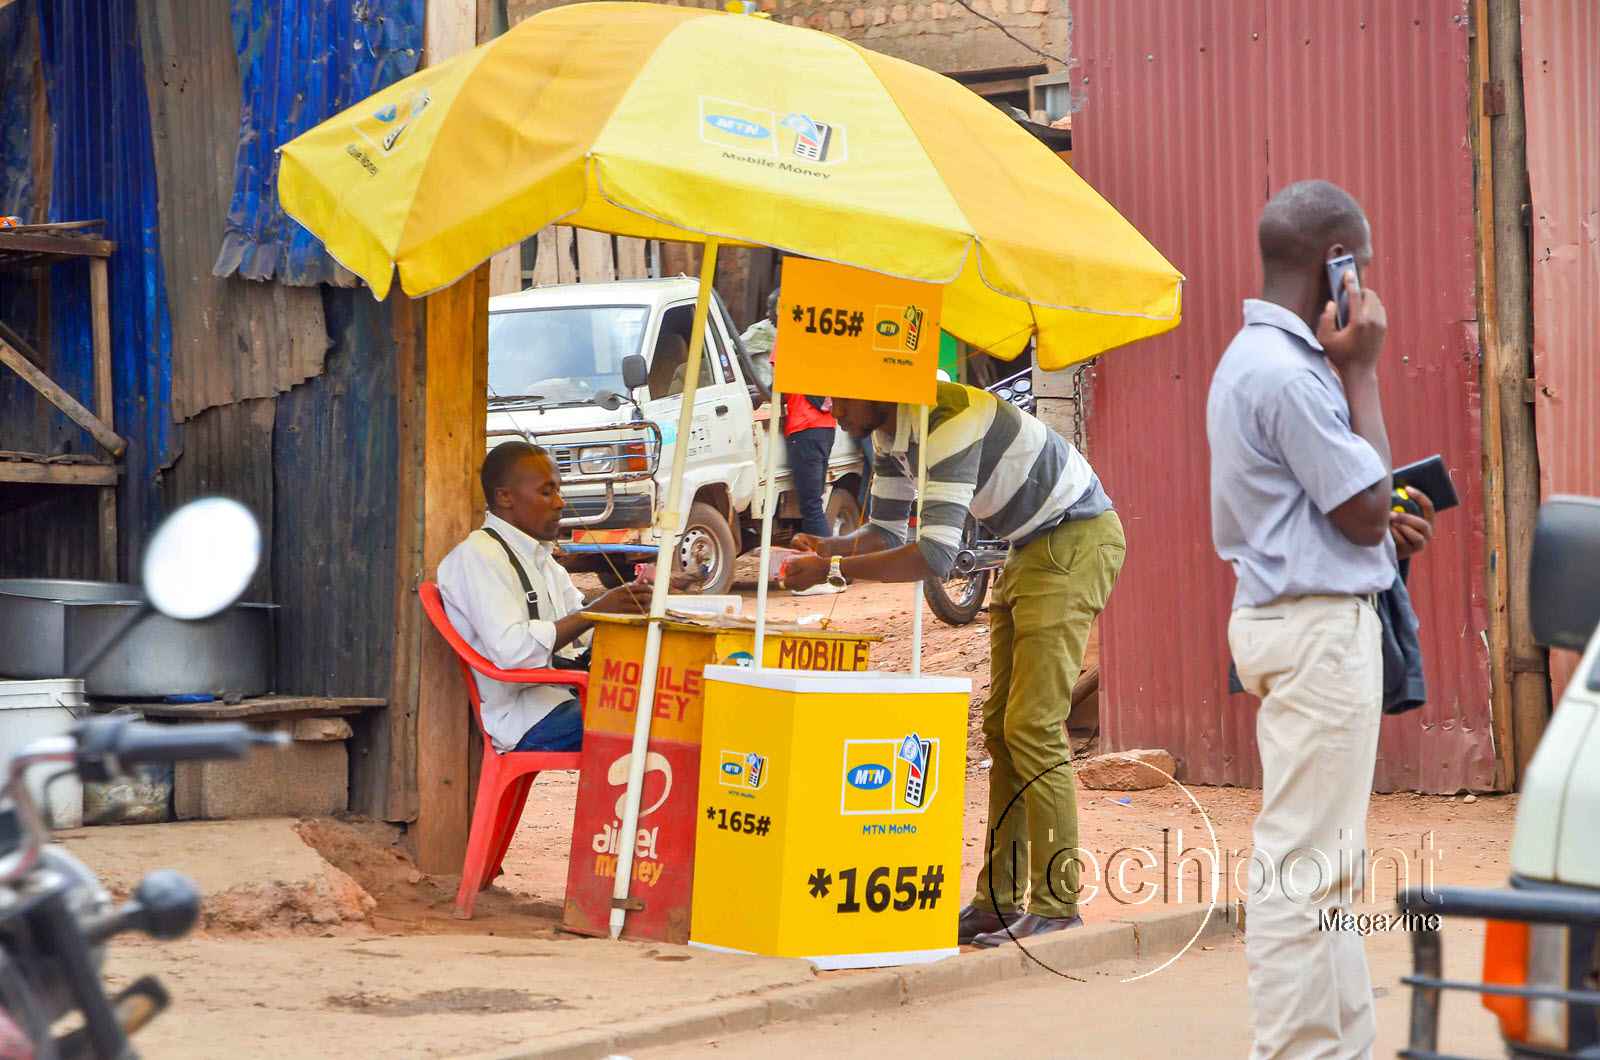 mtn mobile money agents and rates in uganda